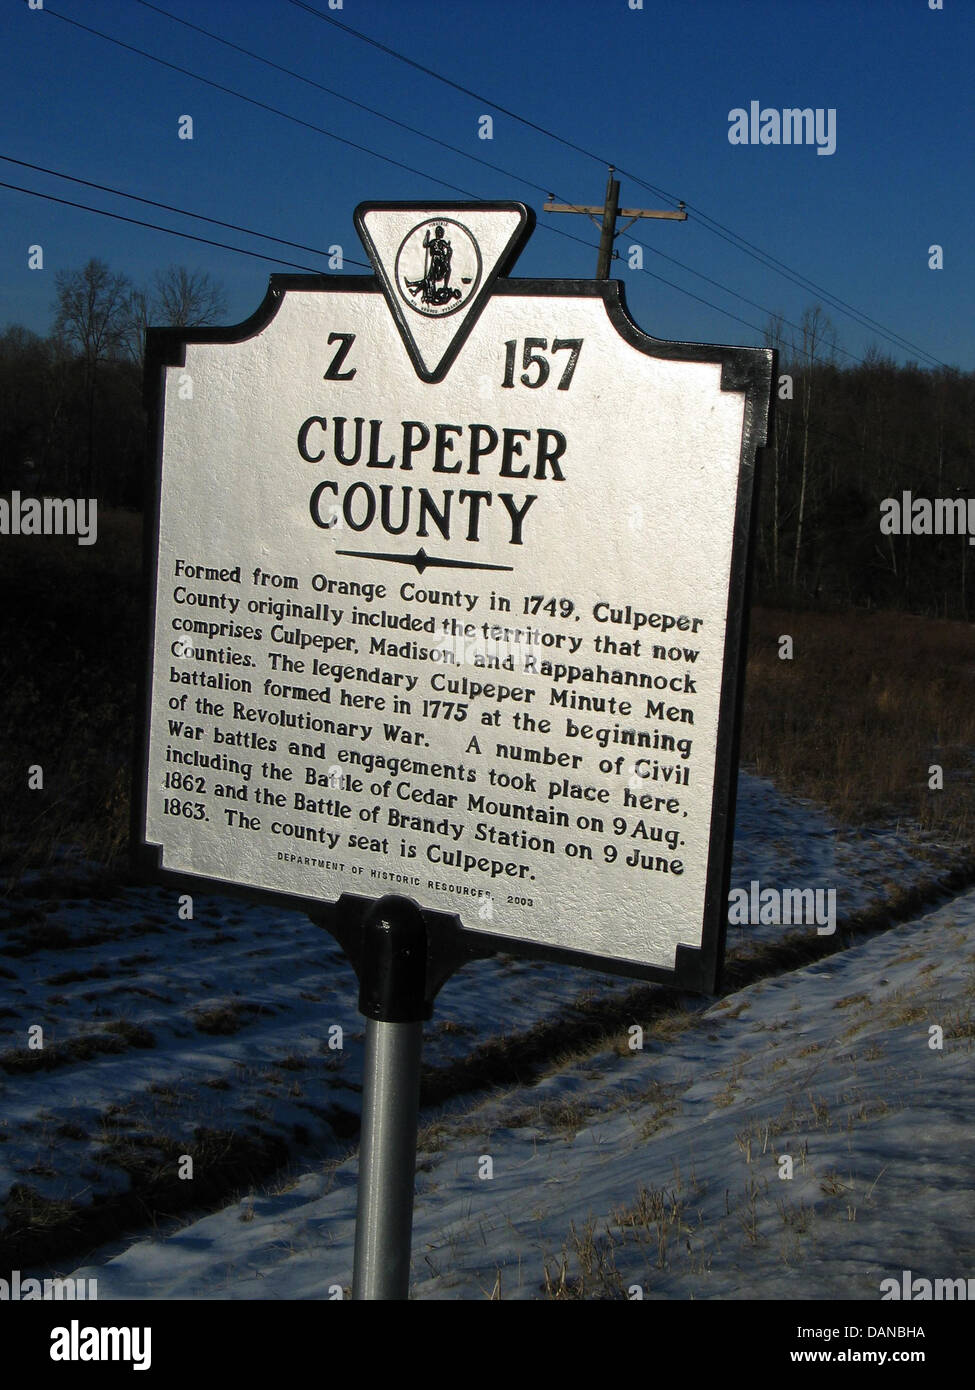 CULPEPER COUNTY Formed from Orange County in 1749, Culpeper County originally included the territory that now comprises Culpeper, Madison, and Rappahannock Counties. The legendary Culpeper Minute Men battalion formed here in 1775 at the beginning of the Revolutionary War. A number of Civil War battles and engagements took place here, including the Battle of Cedar Mountain on 9 Aug. 1862 and the Battle of Brandy Station on 9 June 1863. The county seat is Culpeper. Department of Historic Resources, 2003 Stock Photo